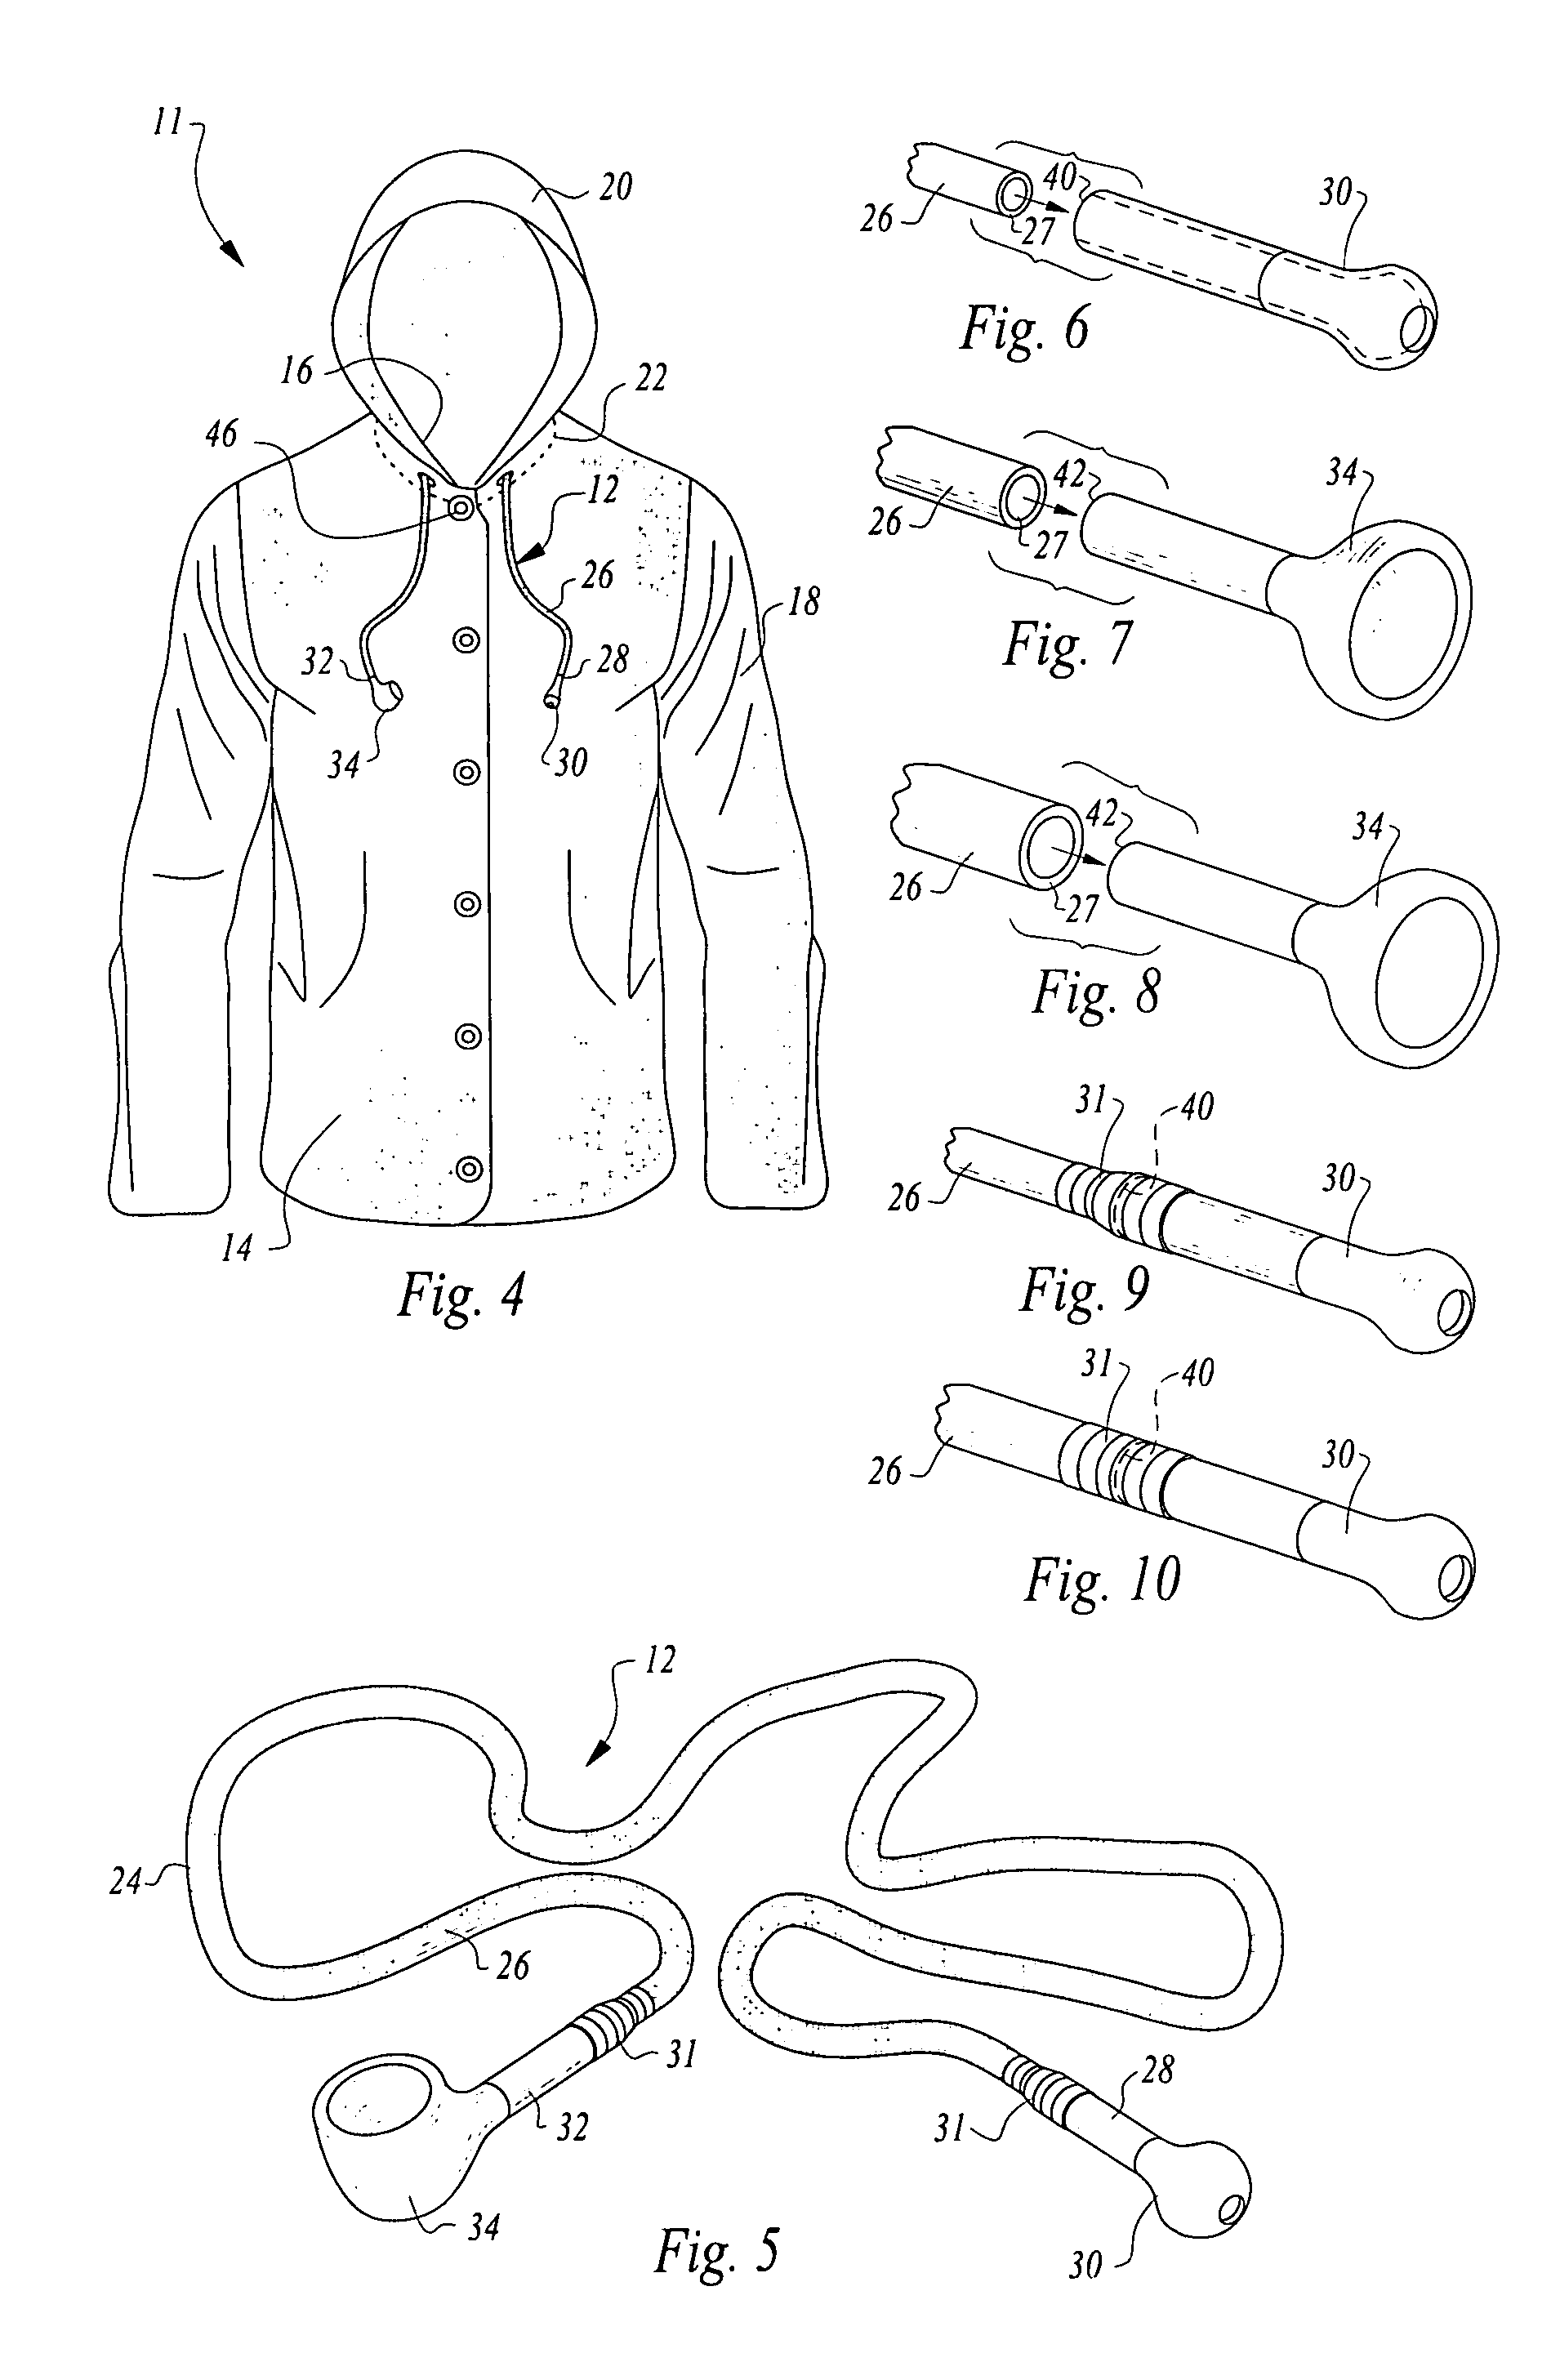 Sweatshirt pipe and attachments